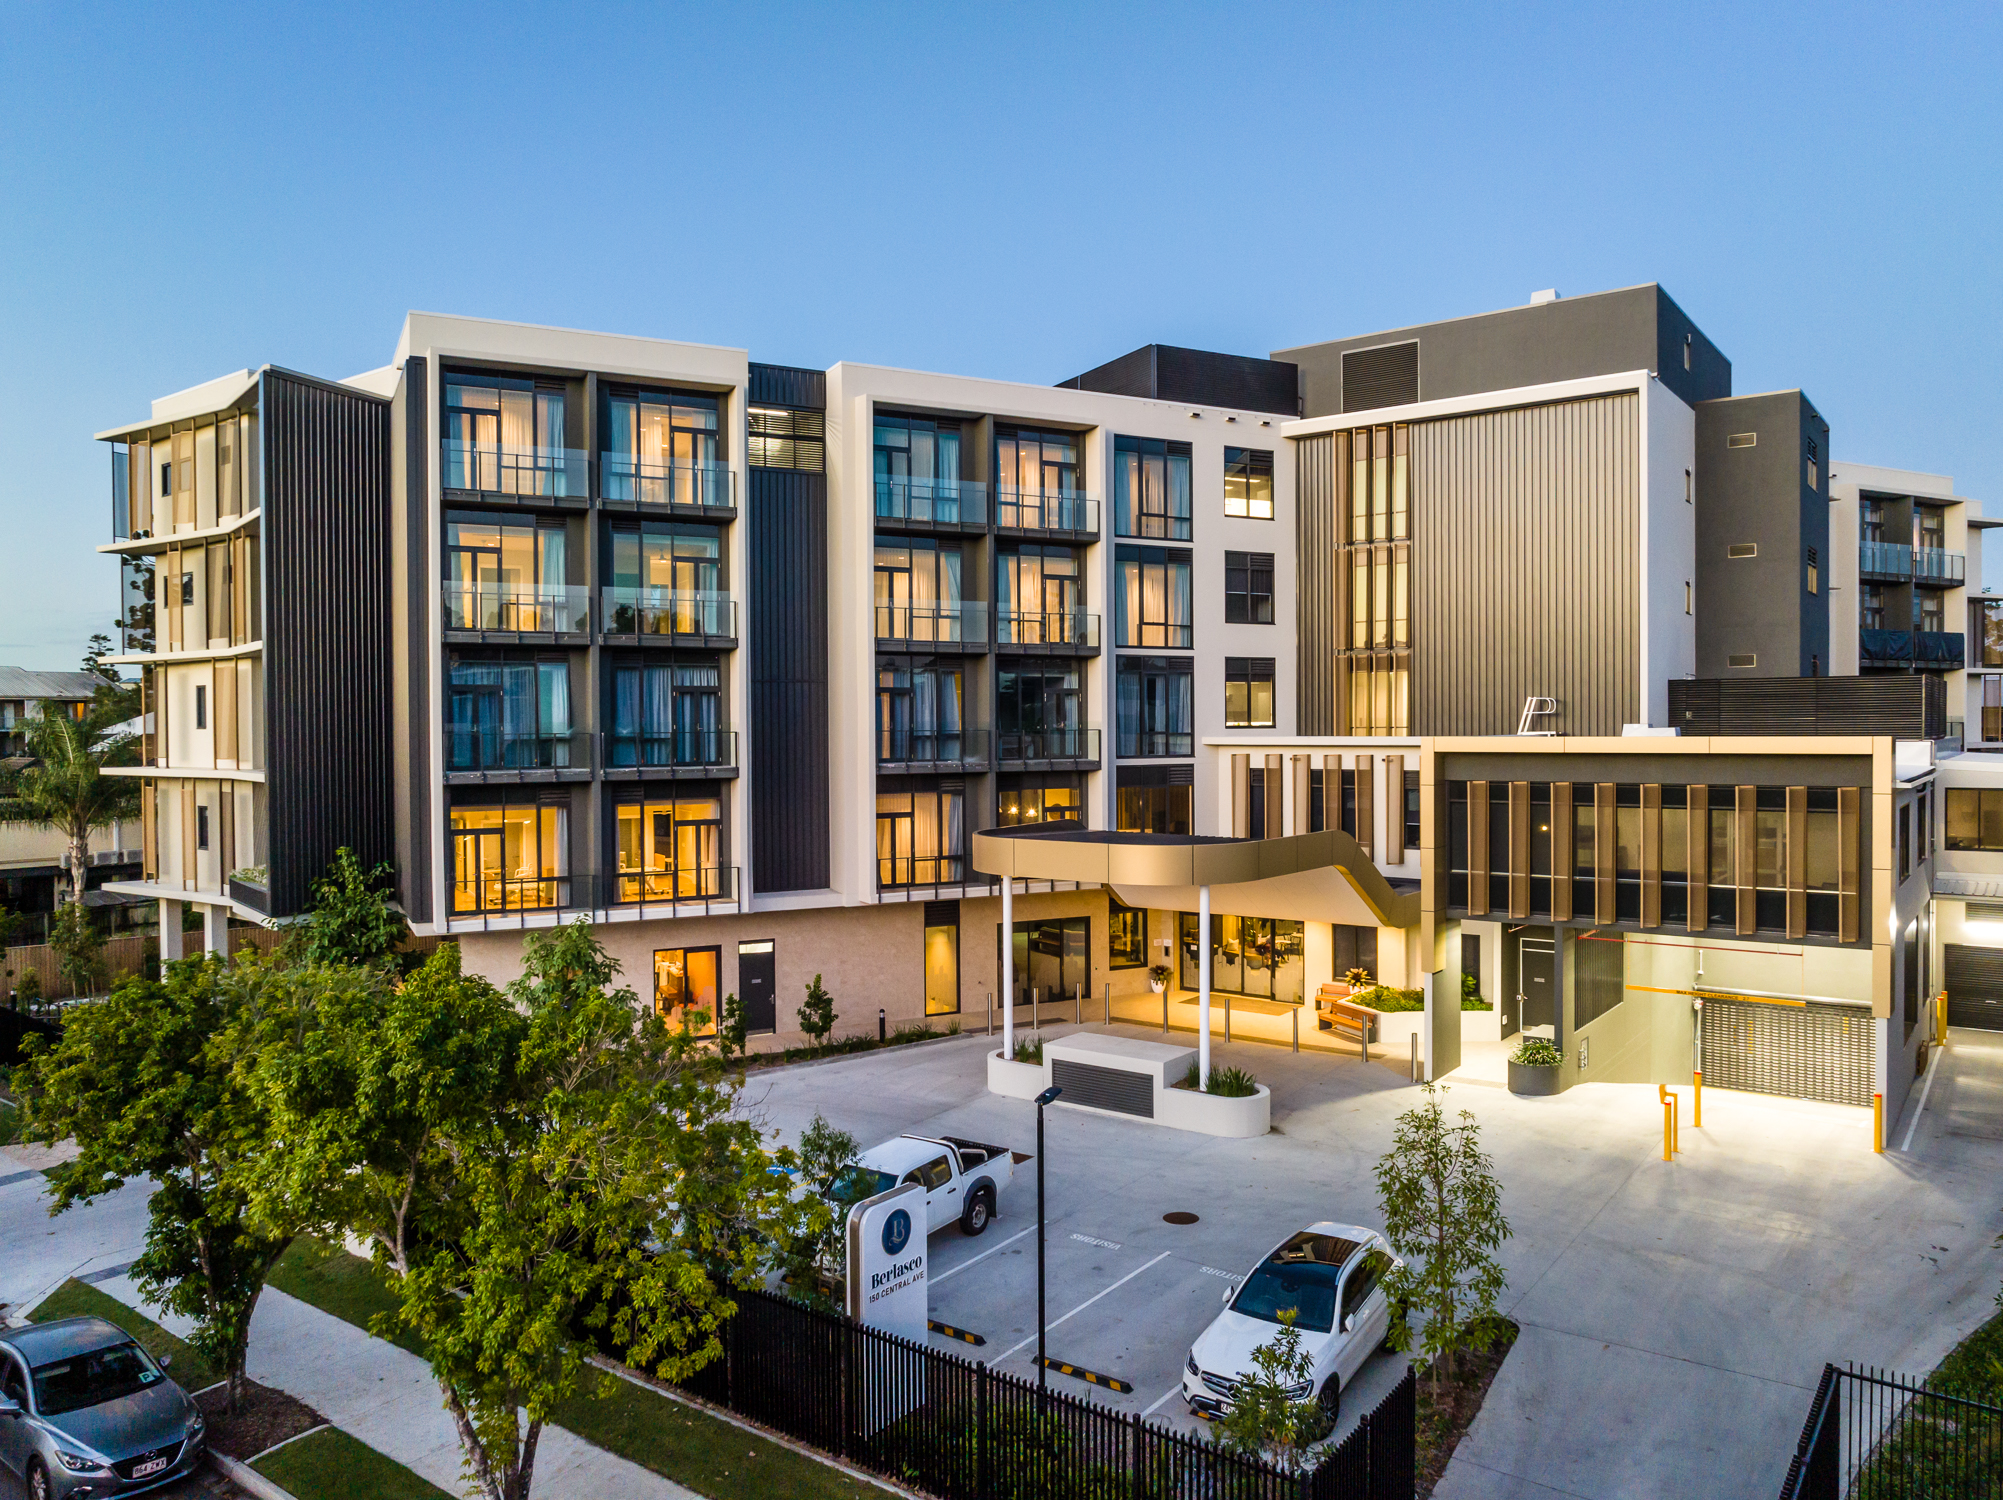 Community Accommodation for Specialist Disability, Aged Care, and Nursing Homes